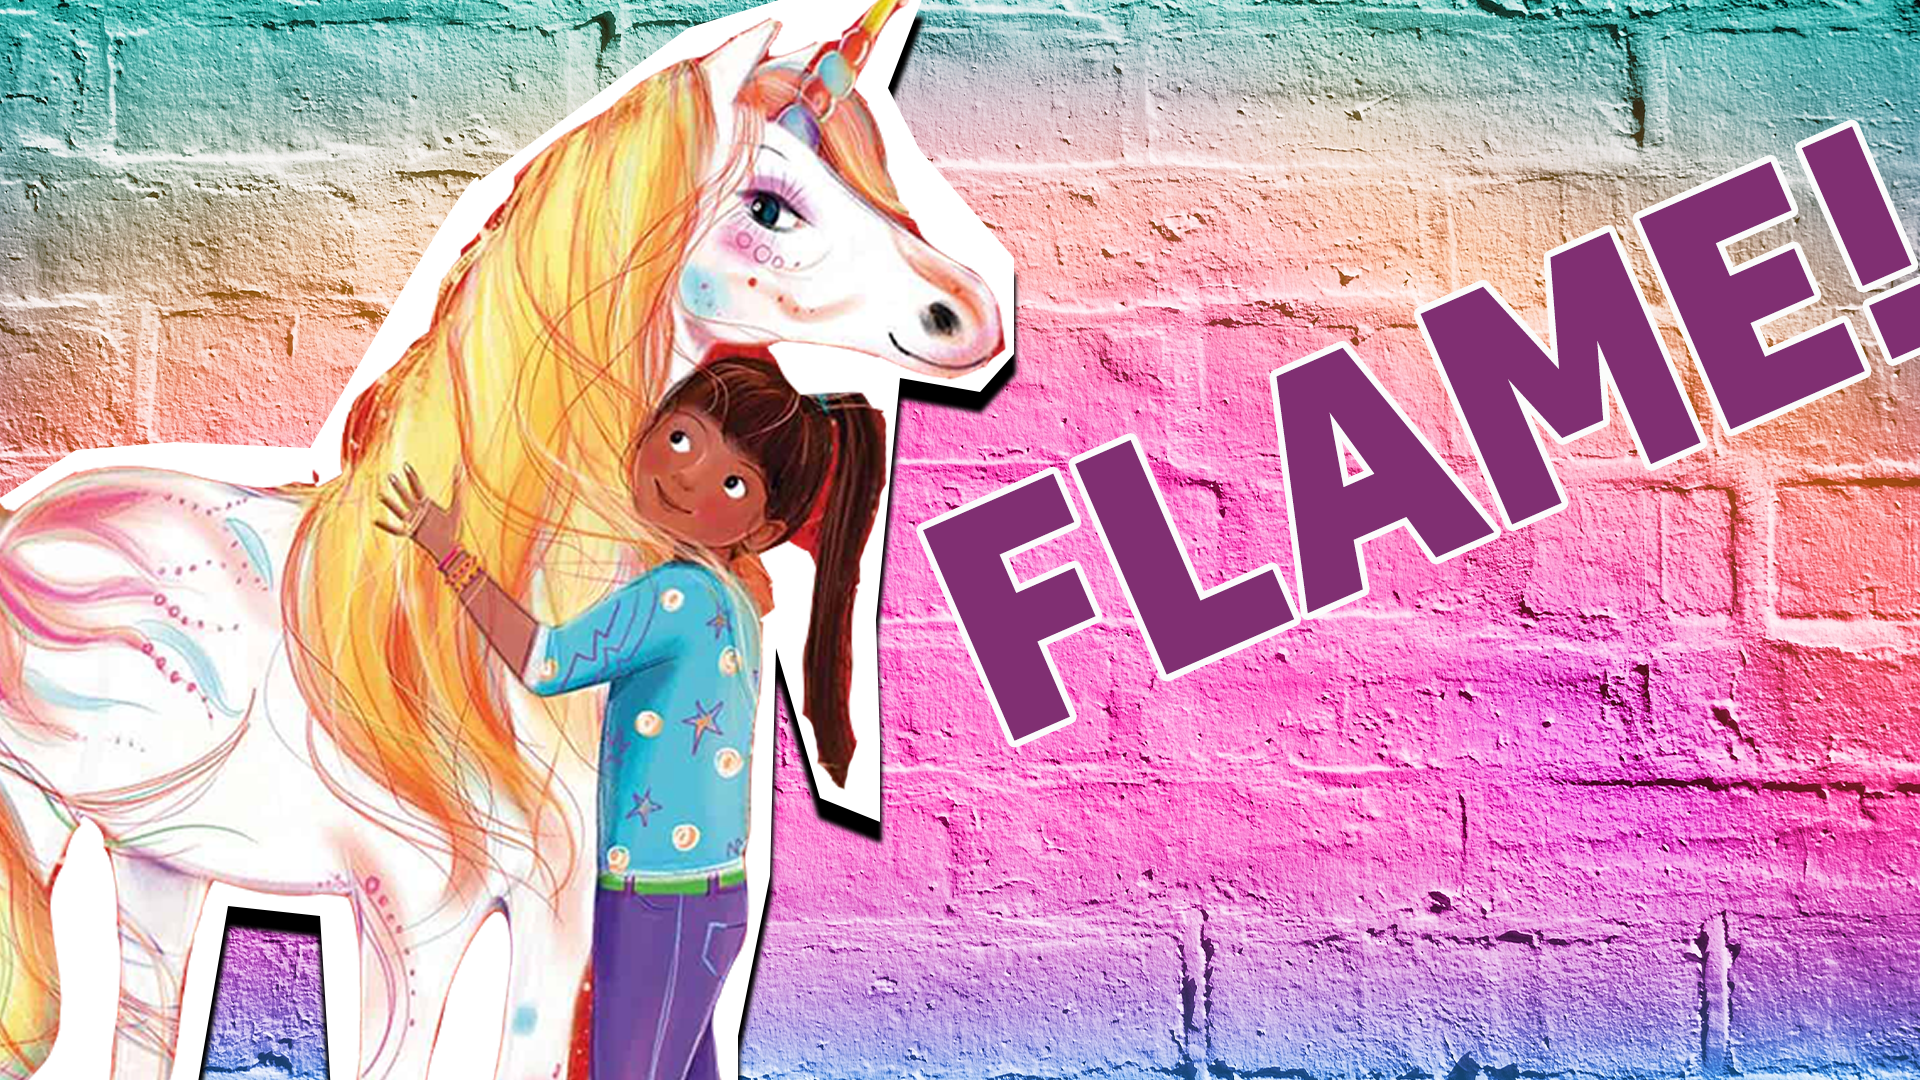 You're most like Flame, Ivy's unicorn! You're adventurous and love discovering new things, but sometimes life can get out of control!